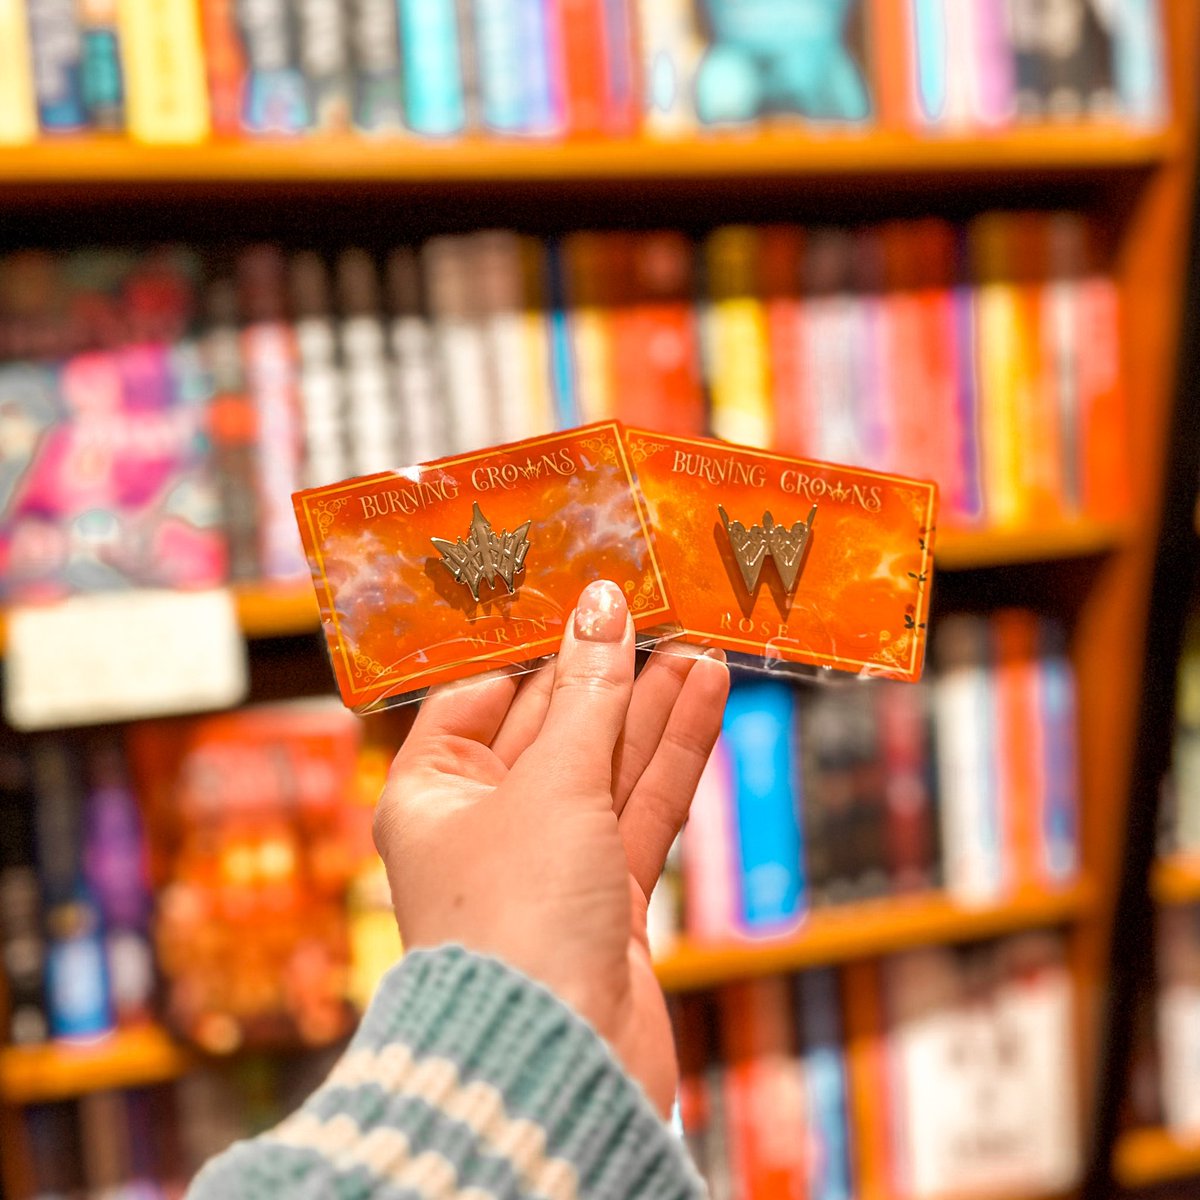 Burning Crowns, the final instalment to the electric Twin Crowns trilogy is here! 👑

Whilst stocks last, we have beautiful Wren or Rose pin badges to give away with purchase!

#waterstonesnorthallerton #northallerton #lovenorthallerton #waterstones #twincrowns